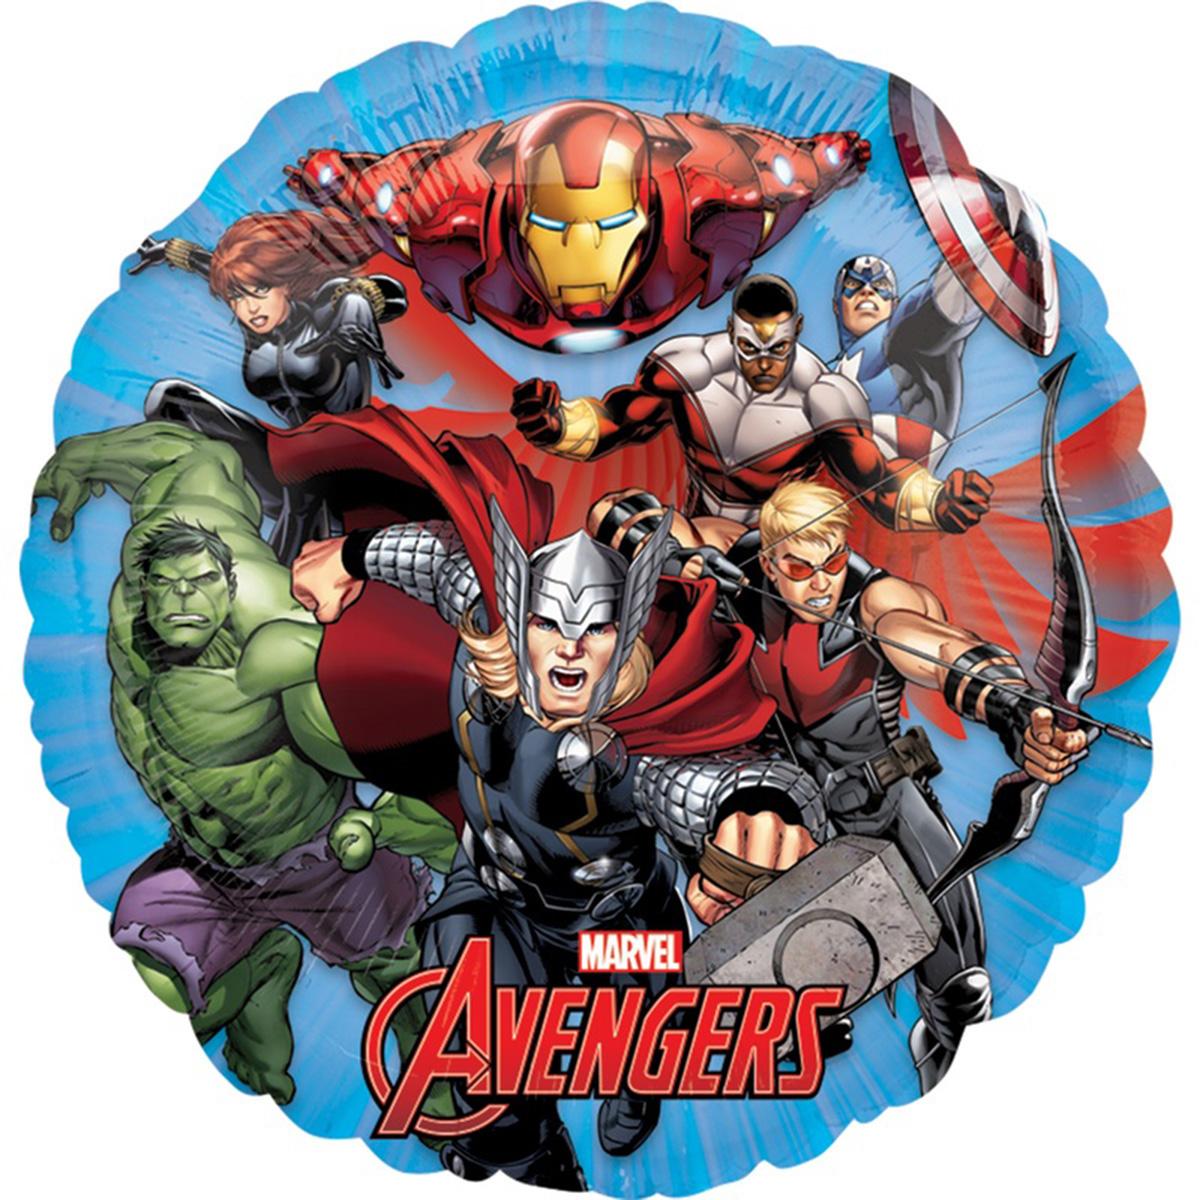 Avengers Assemble Balloon 9in Balloons & Streamers - Party Centre